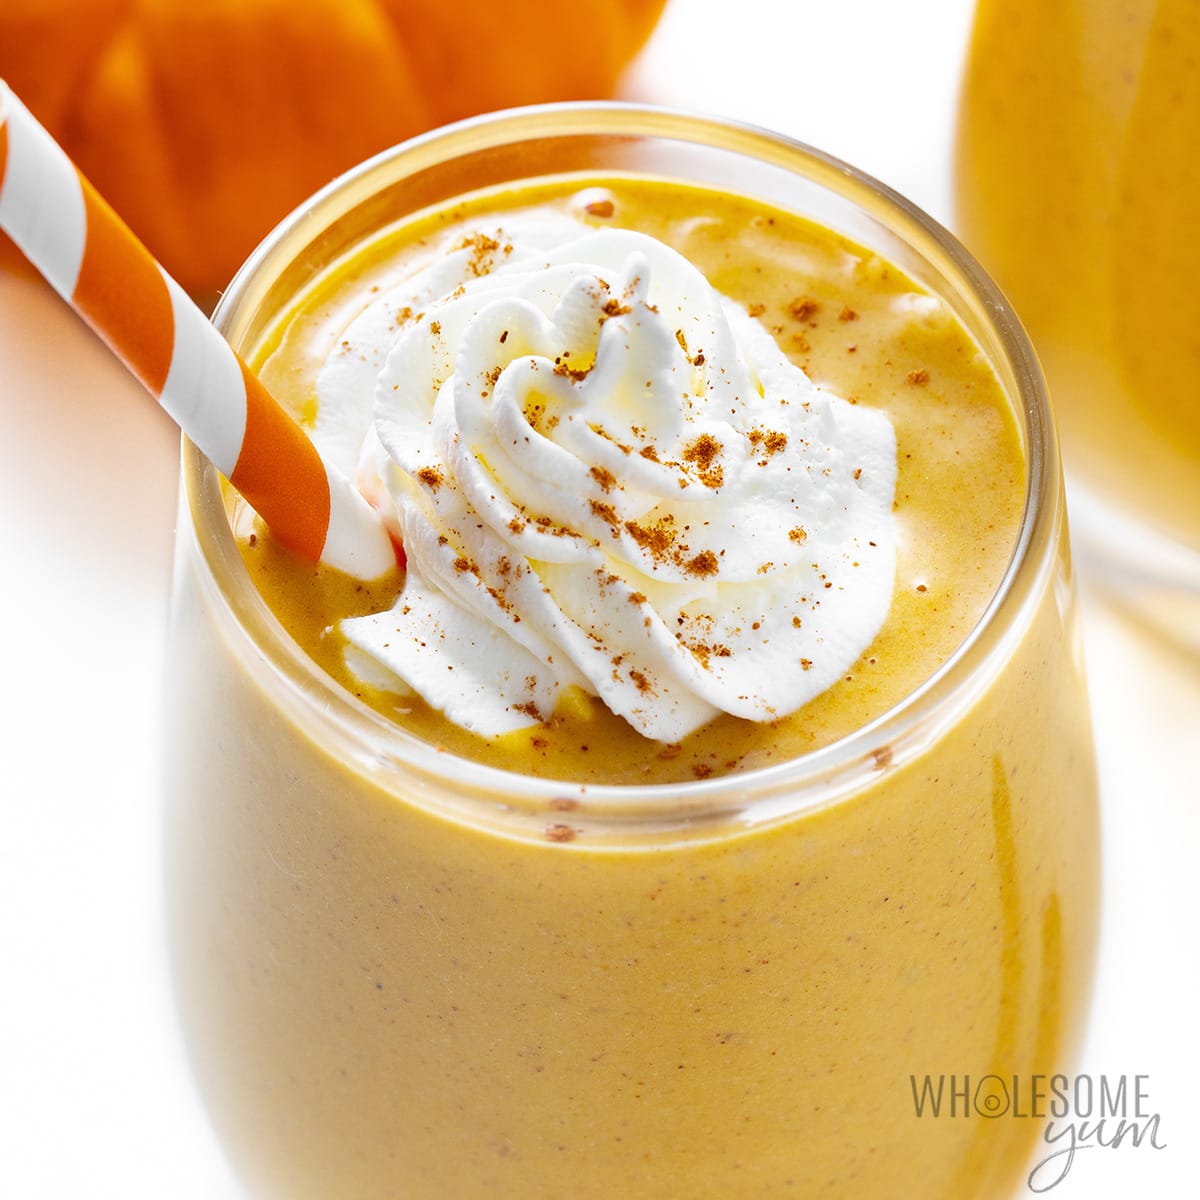 Pumpkin smoothie in a glass with a straw.